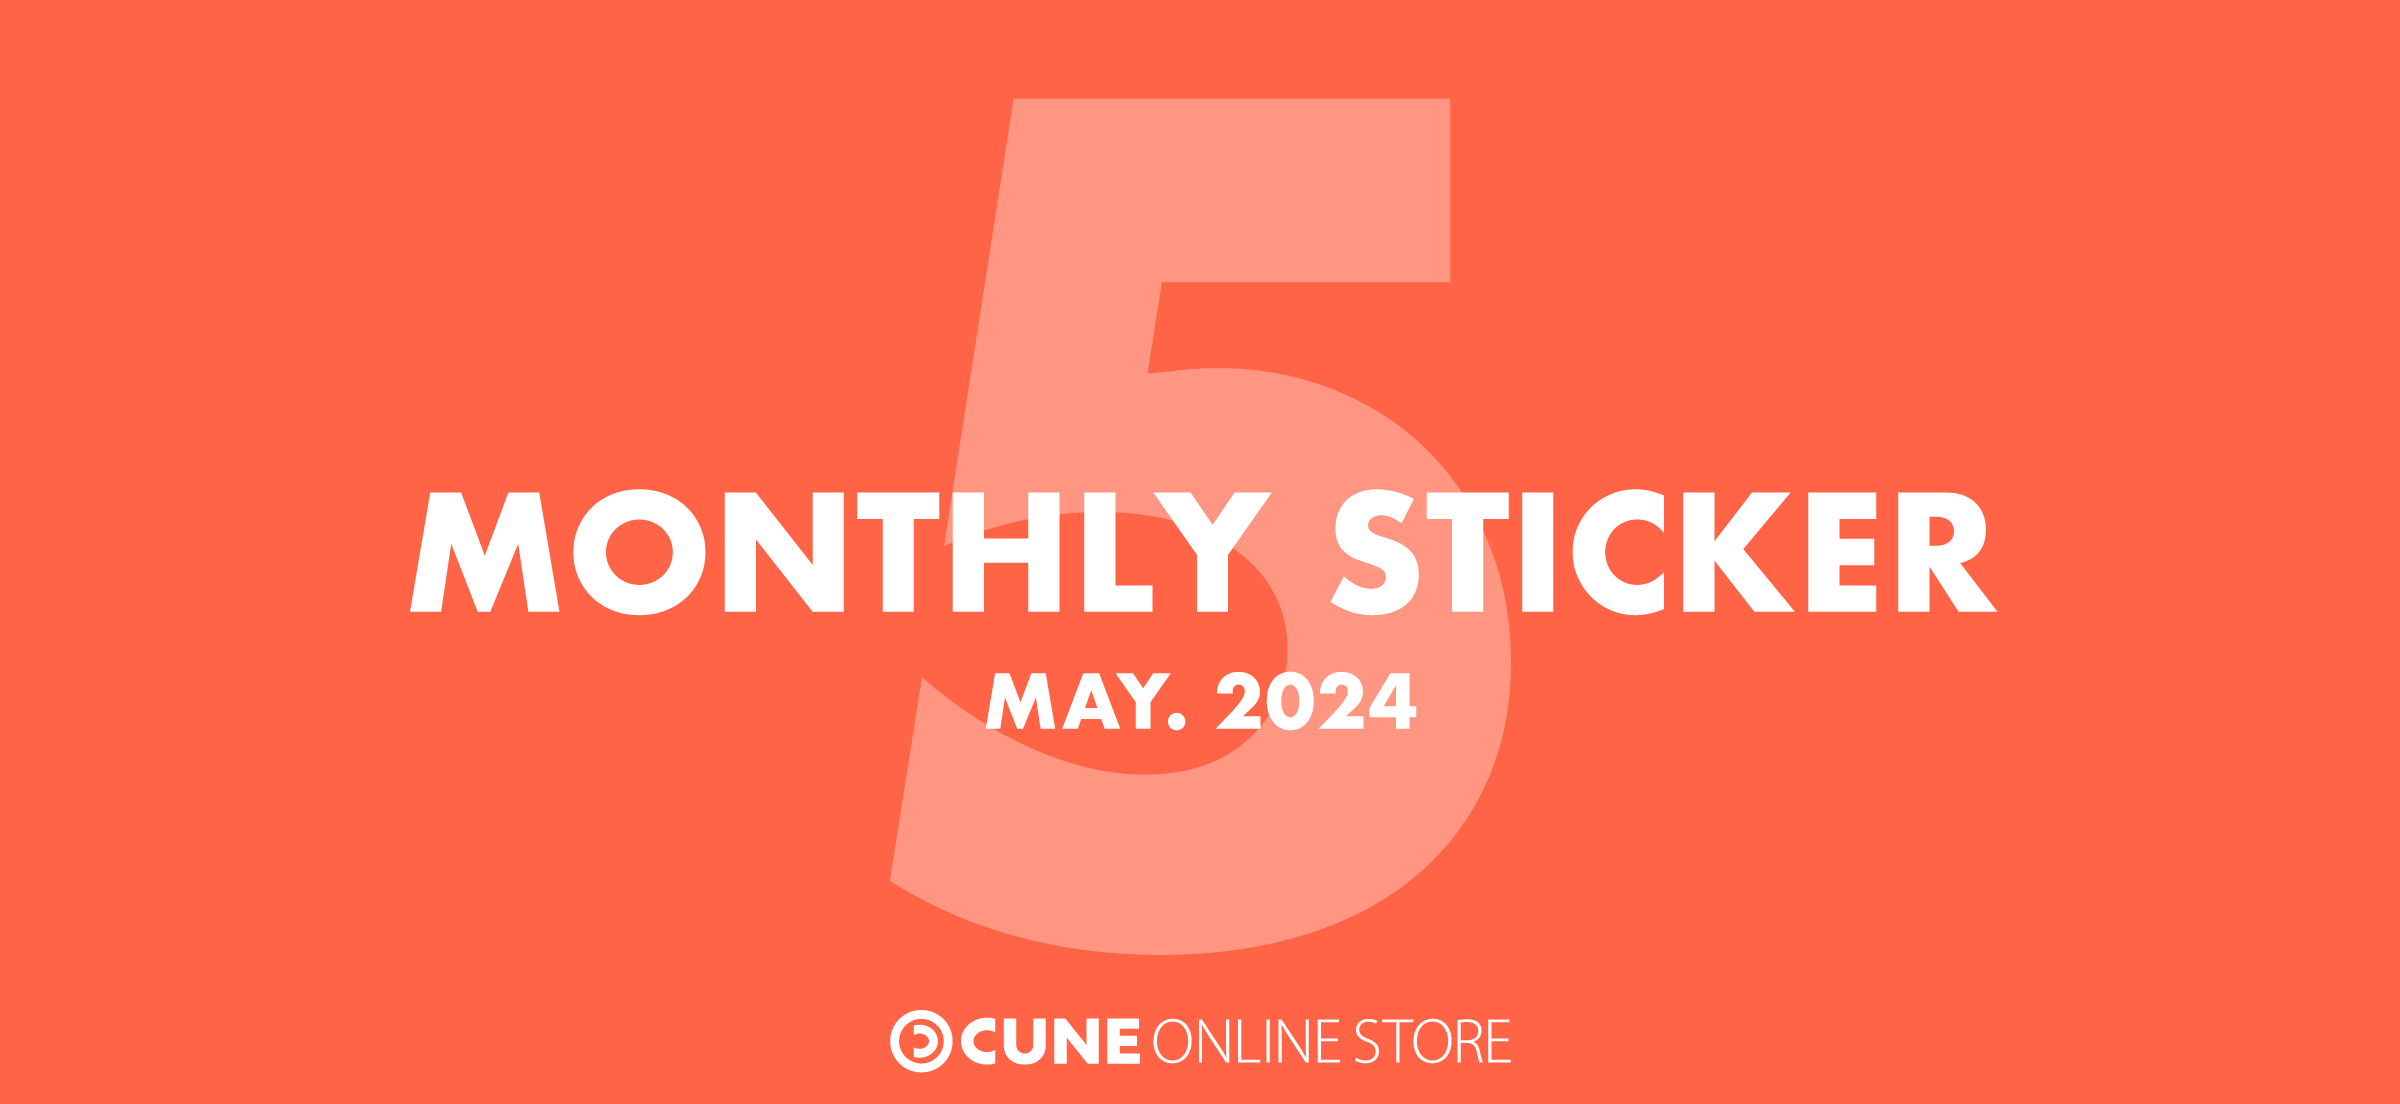 CUNE MONTHLY STICKER may 2024